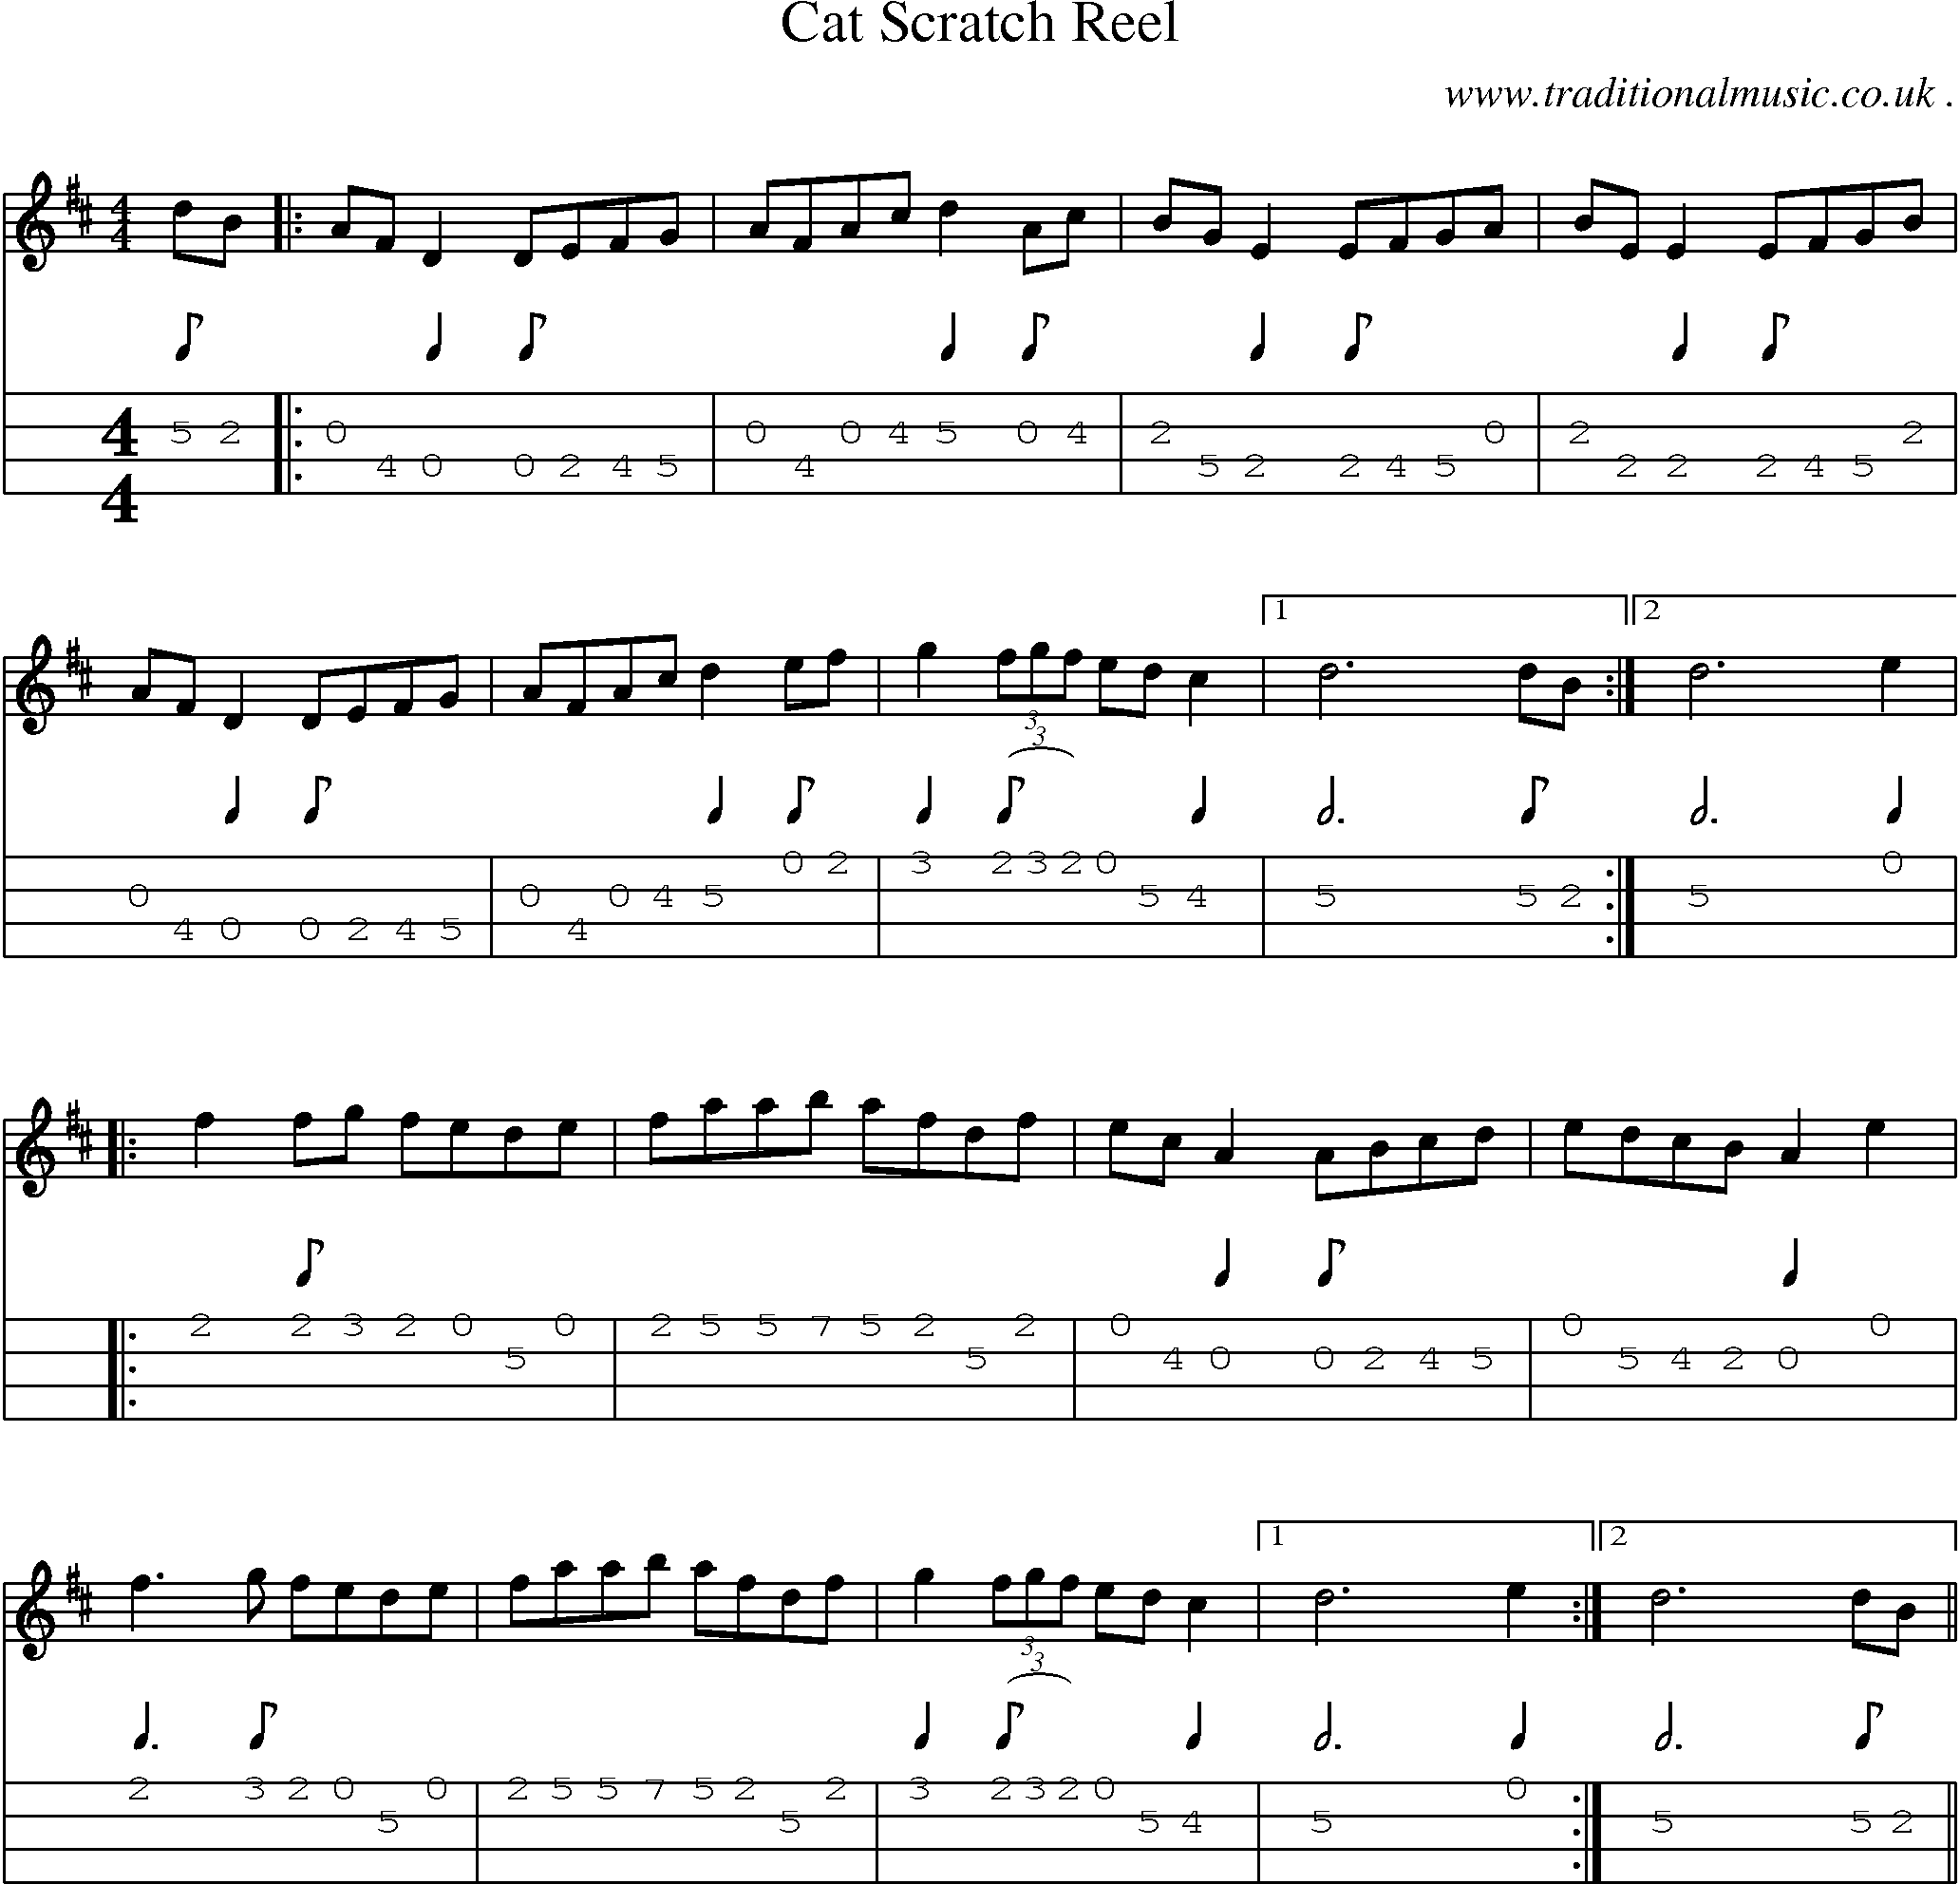 Sheet-Music and Mandolin Tabs for Cat Scratch Reel